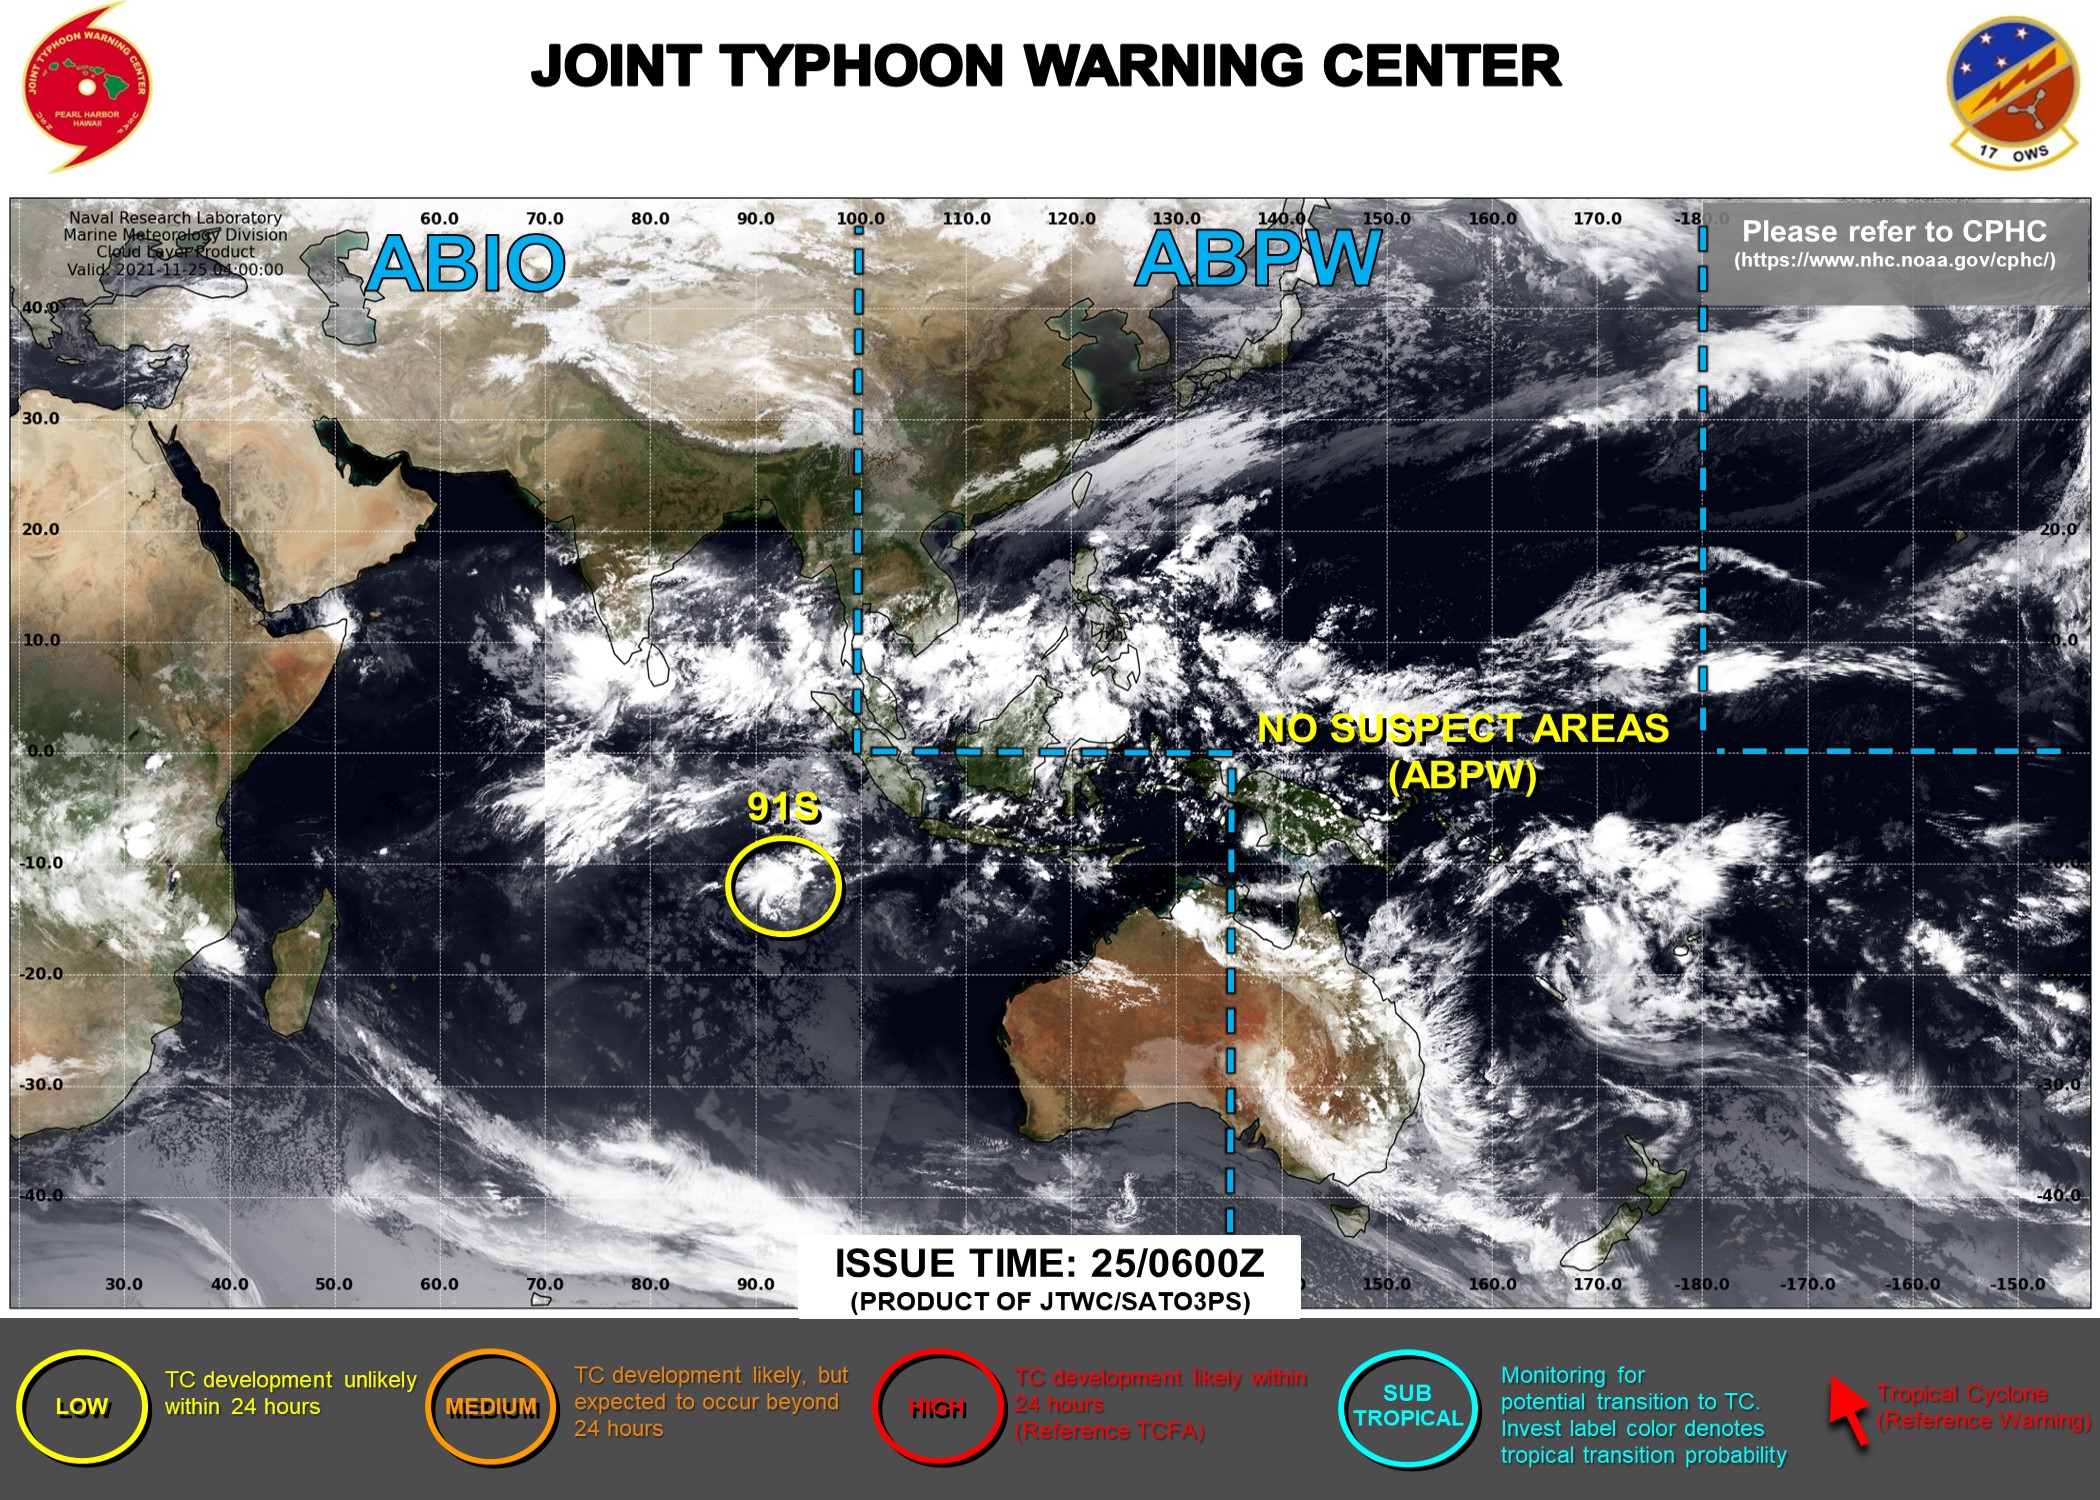 JTWC ISSUED THE FINAL WARNING ON TC 01S(PADDY) AT 24/15UTC AND THE FINAL SATELLITE BULLETIN AT 24/1730UTC.